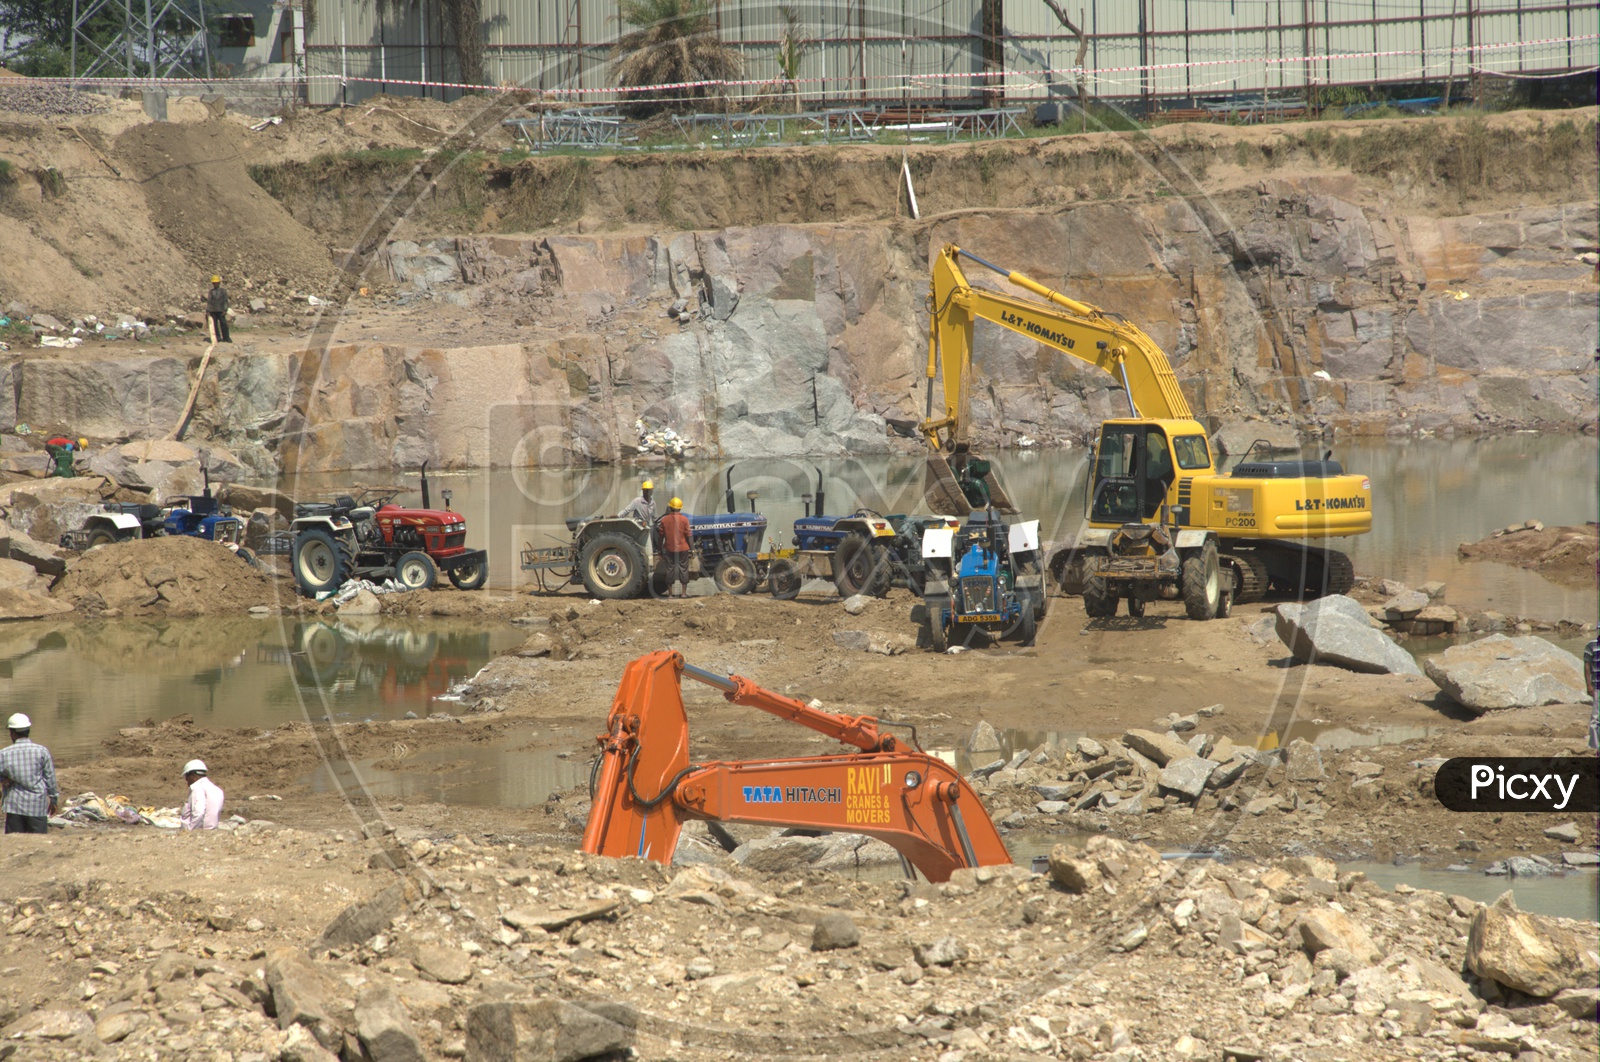 Bulldozers and tractors alongside the excavation site